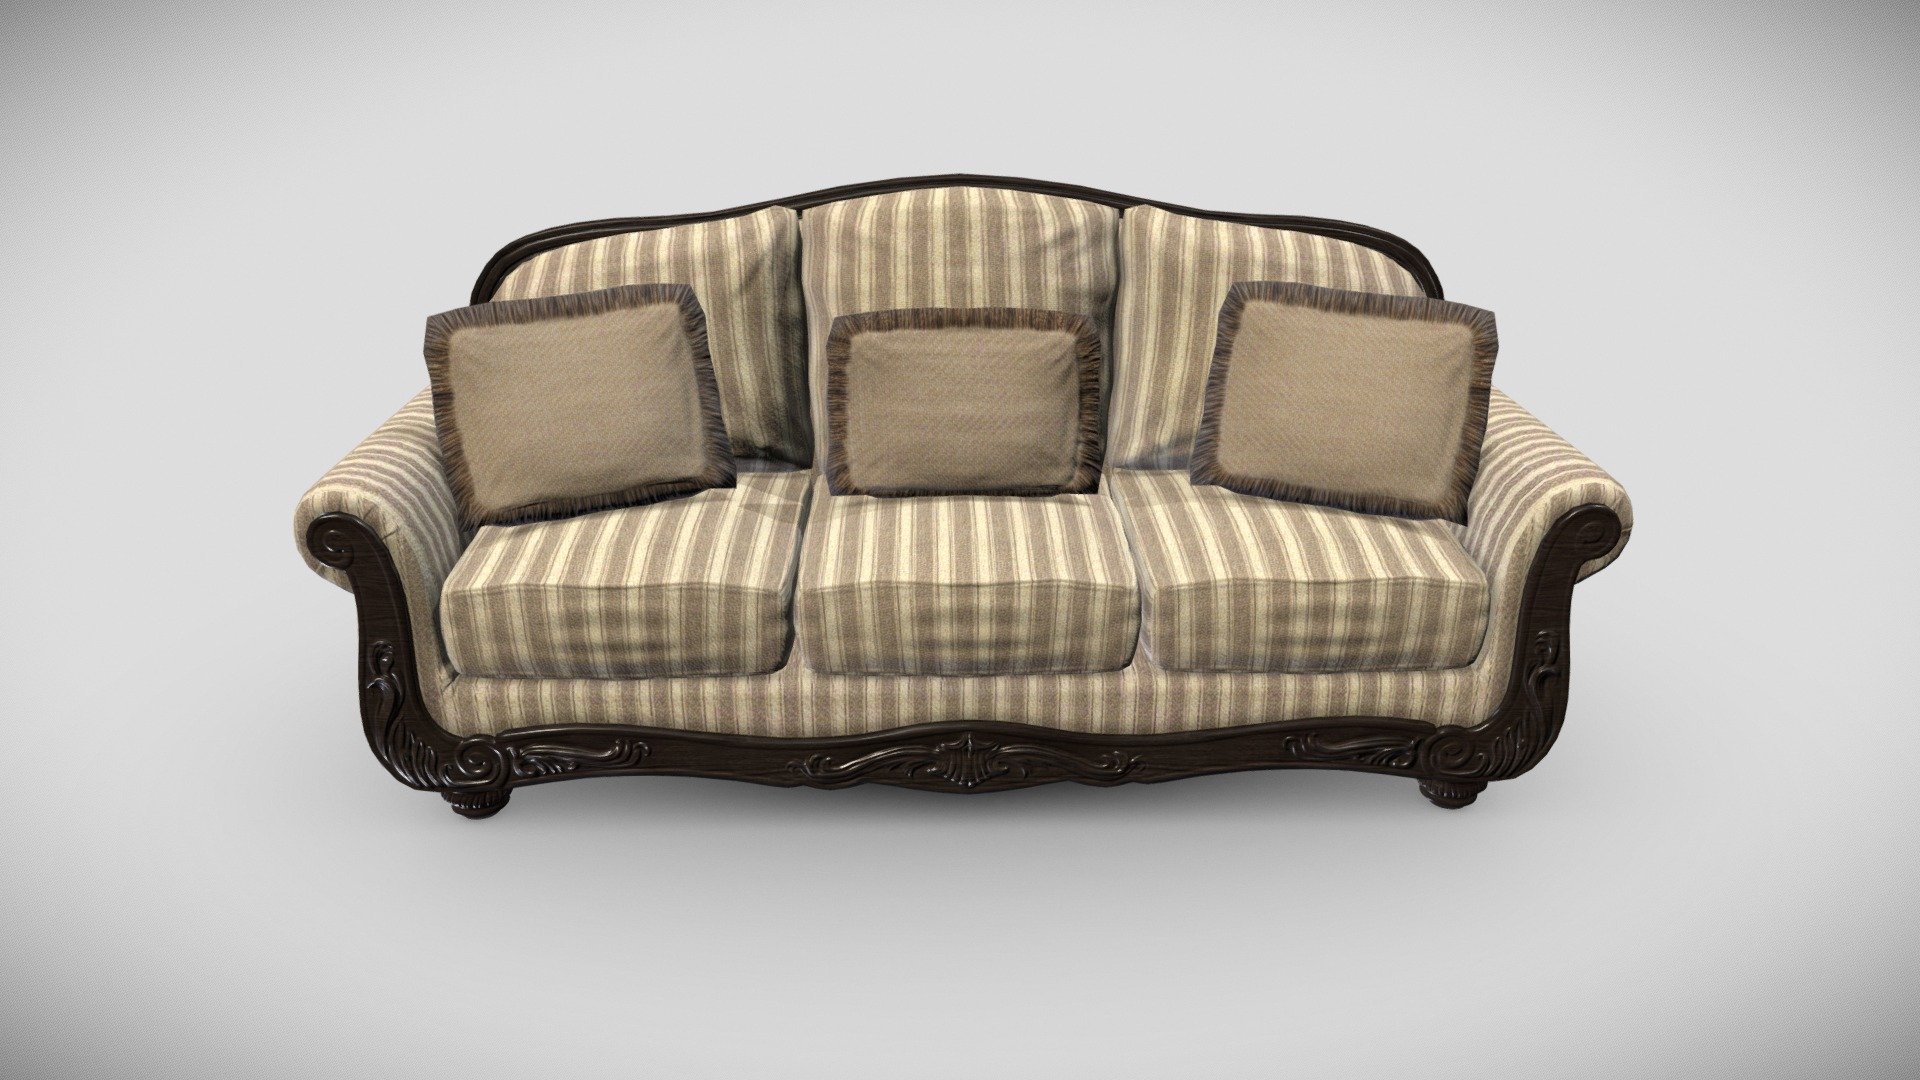 An antique-style sofa model with textures.

Color variations included in zip file.

Color, Normal, and Spec/Gloss.

Collada, FBX, and OBJ formats included 3d model